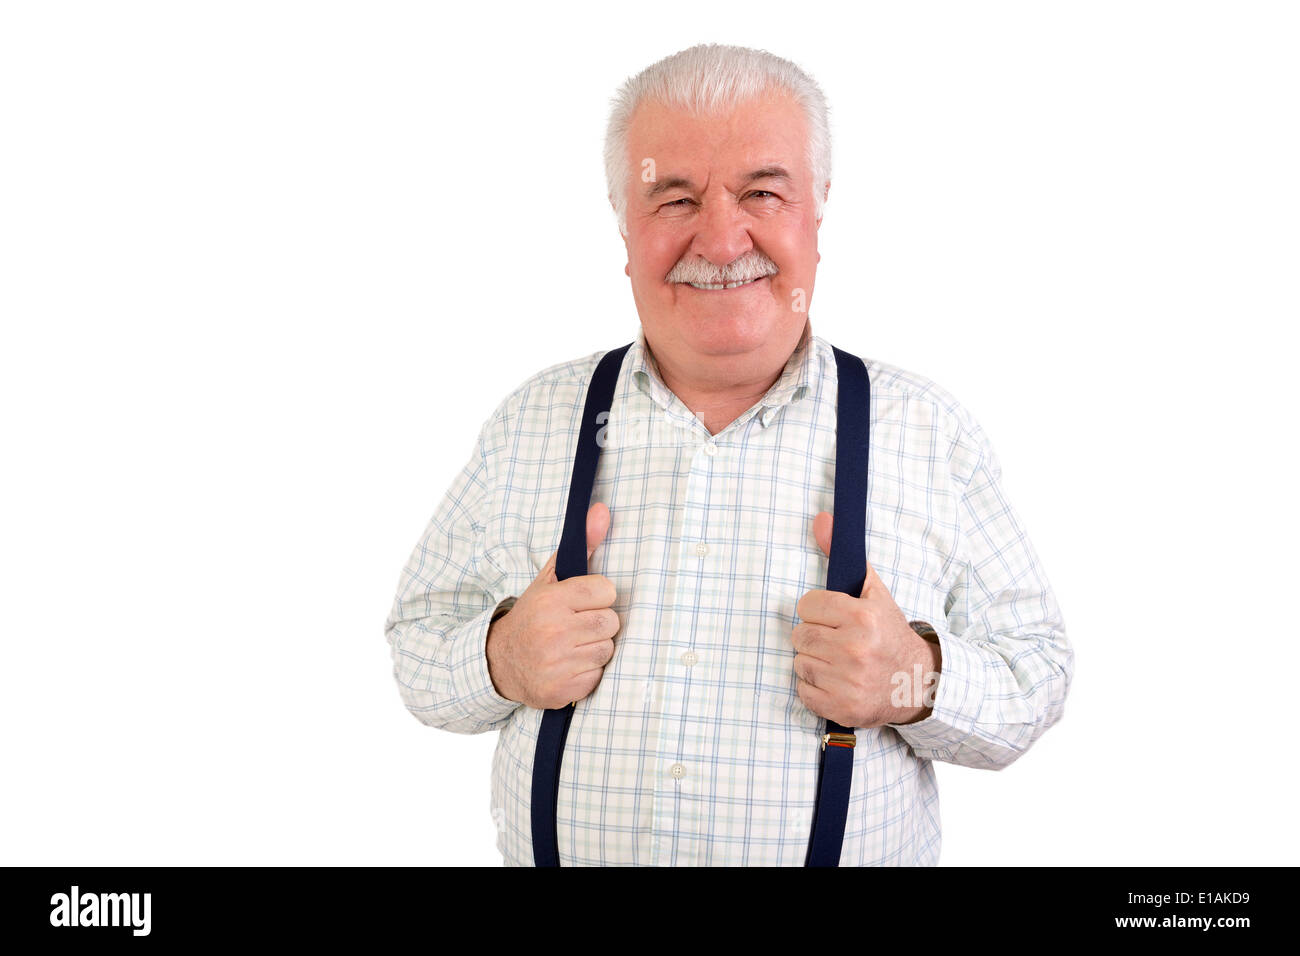 Confident senior grey-haired man with a mustache and beaming friendly smile holding his suspenders or braces, upper body isolat Stock Photo